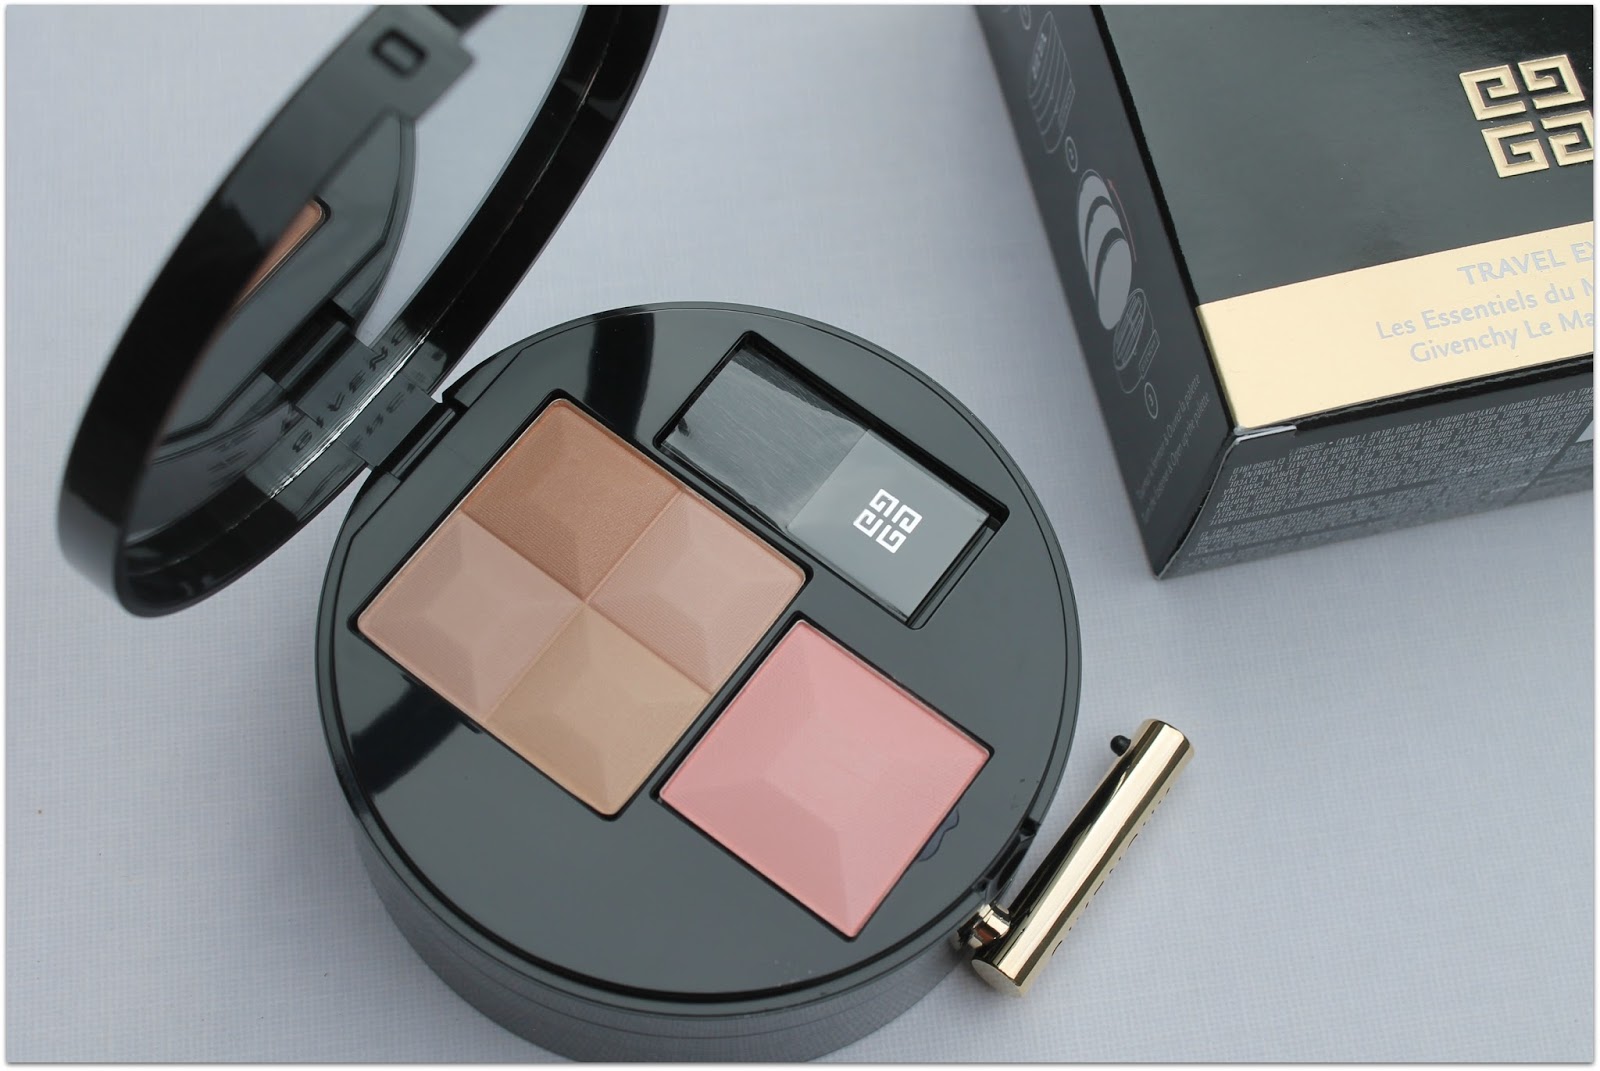 NFP: Givenchy Glamour On The Go 3-Step Makeup Palette